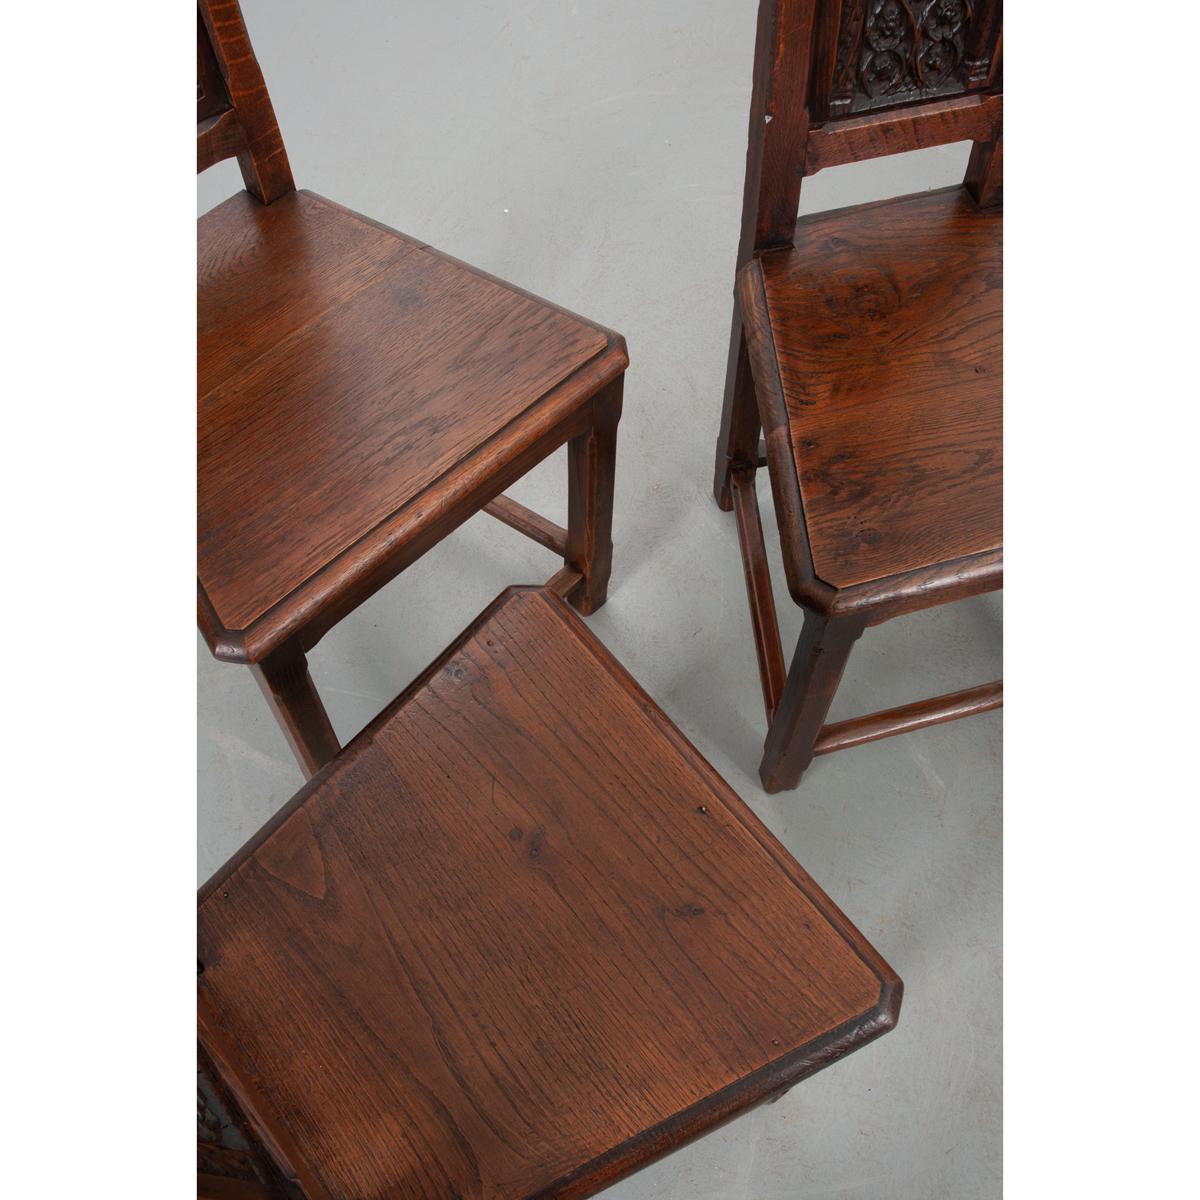 This set of remarkable Gothic style chairs are made of solid oak that has acquired a warm patina over the last two centuries. Made in France circa 1800. One chair is slightly taller than the others, suggesting it was designated for the head of the